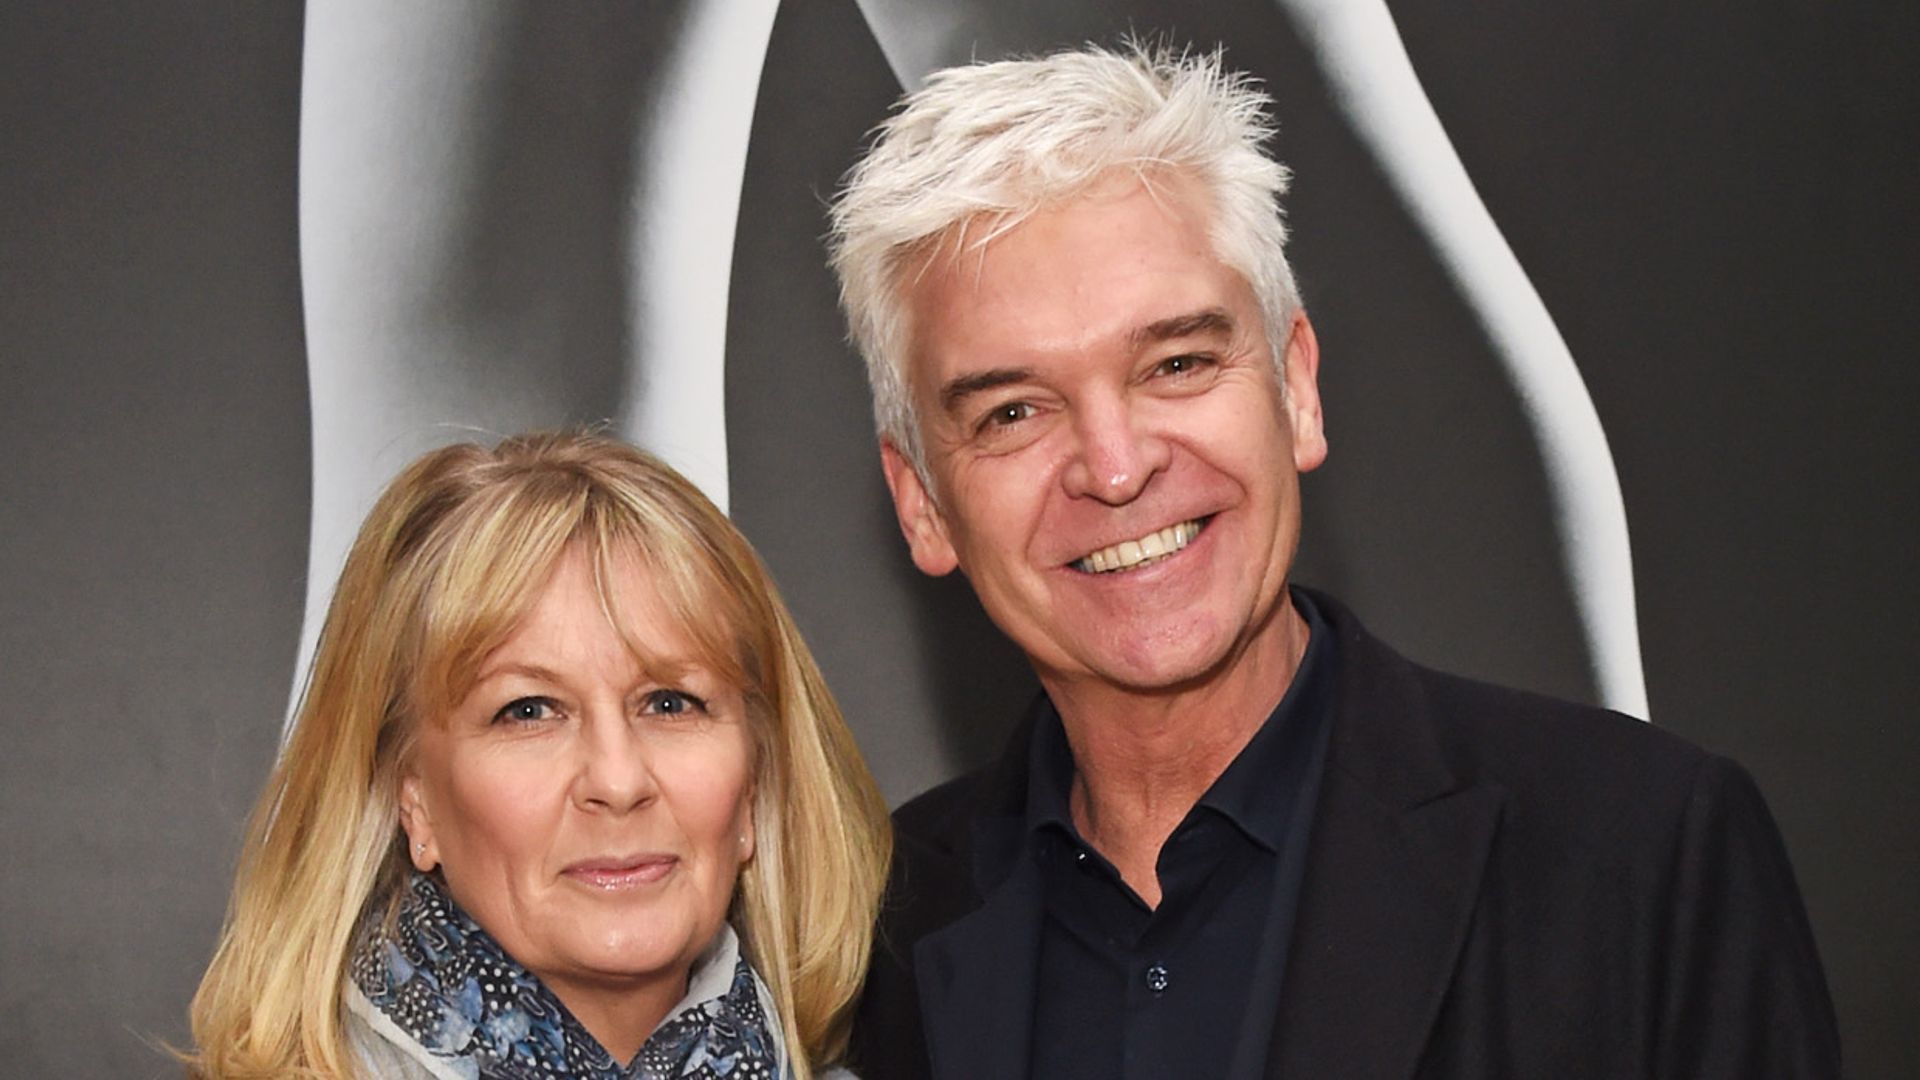 Phillip Schofield and estranged wife Stephanie Lowe show off new puppies during birthday day out